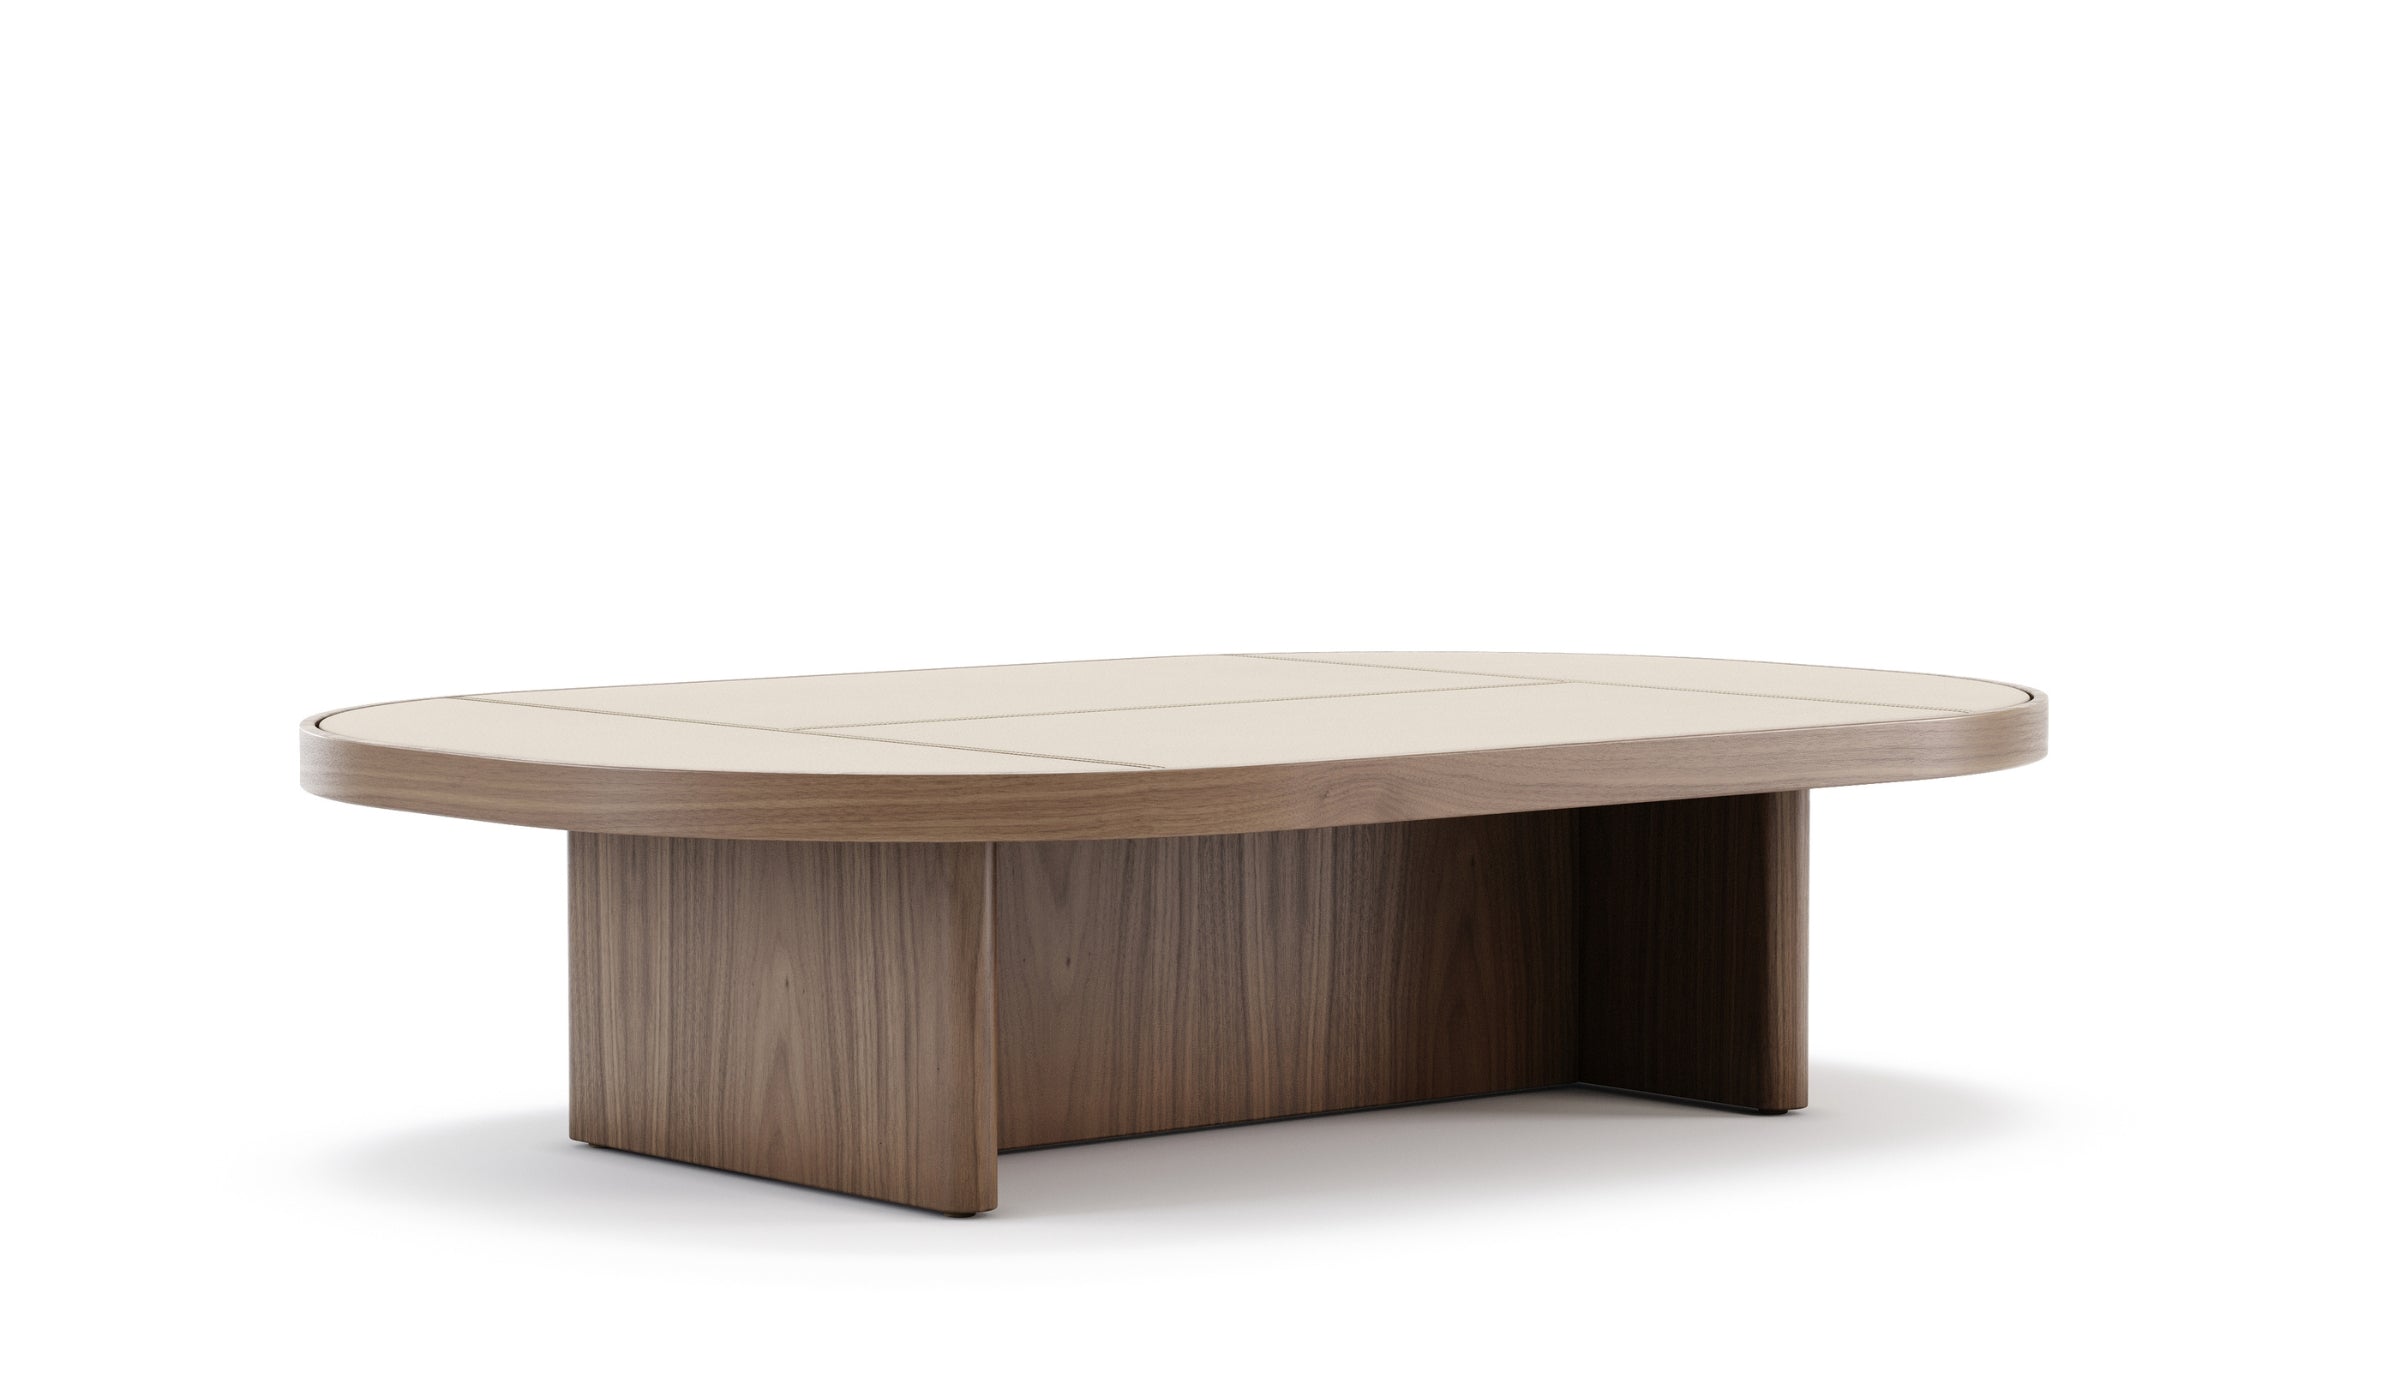 Gilbert - Coffee table in natural walnut, almond leather finish, L